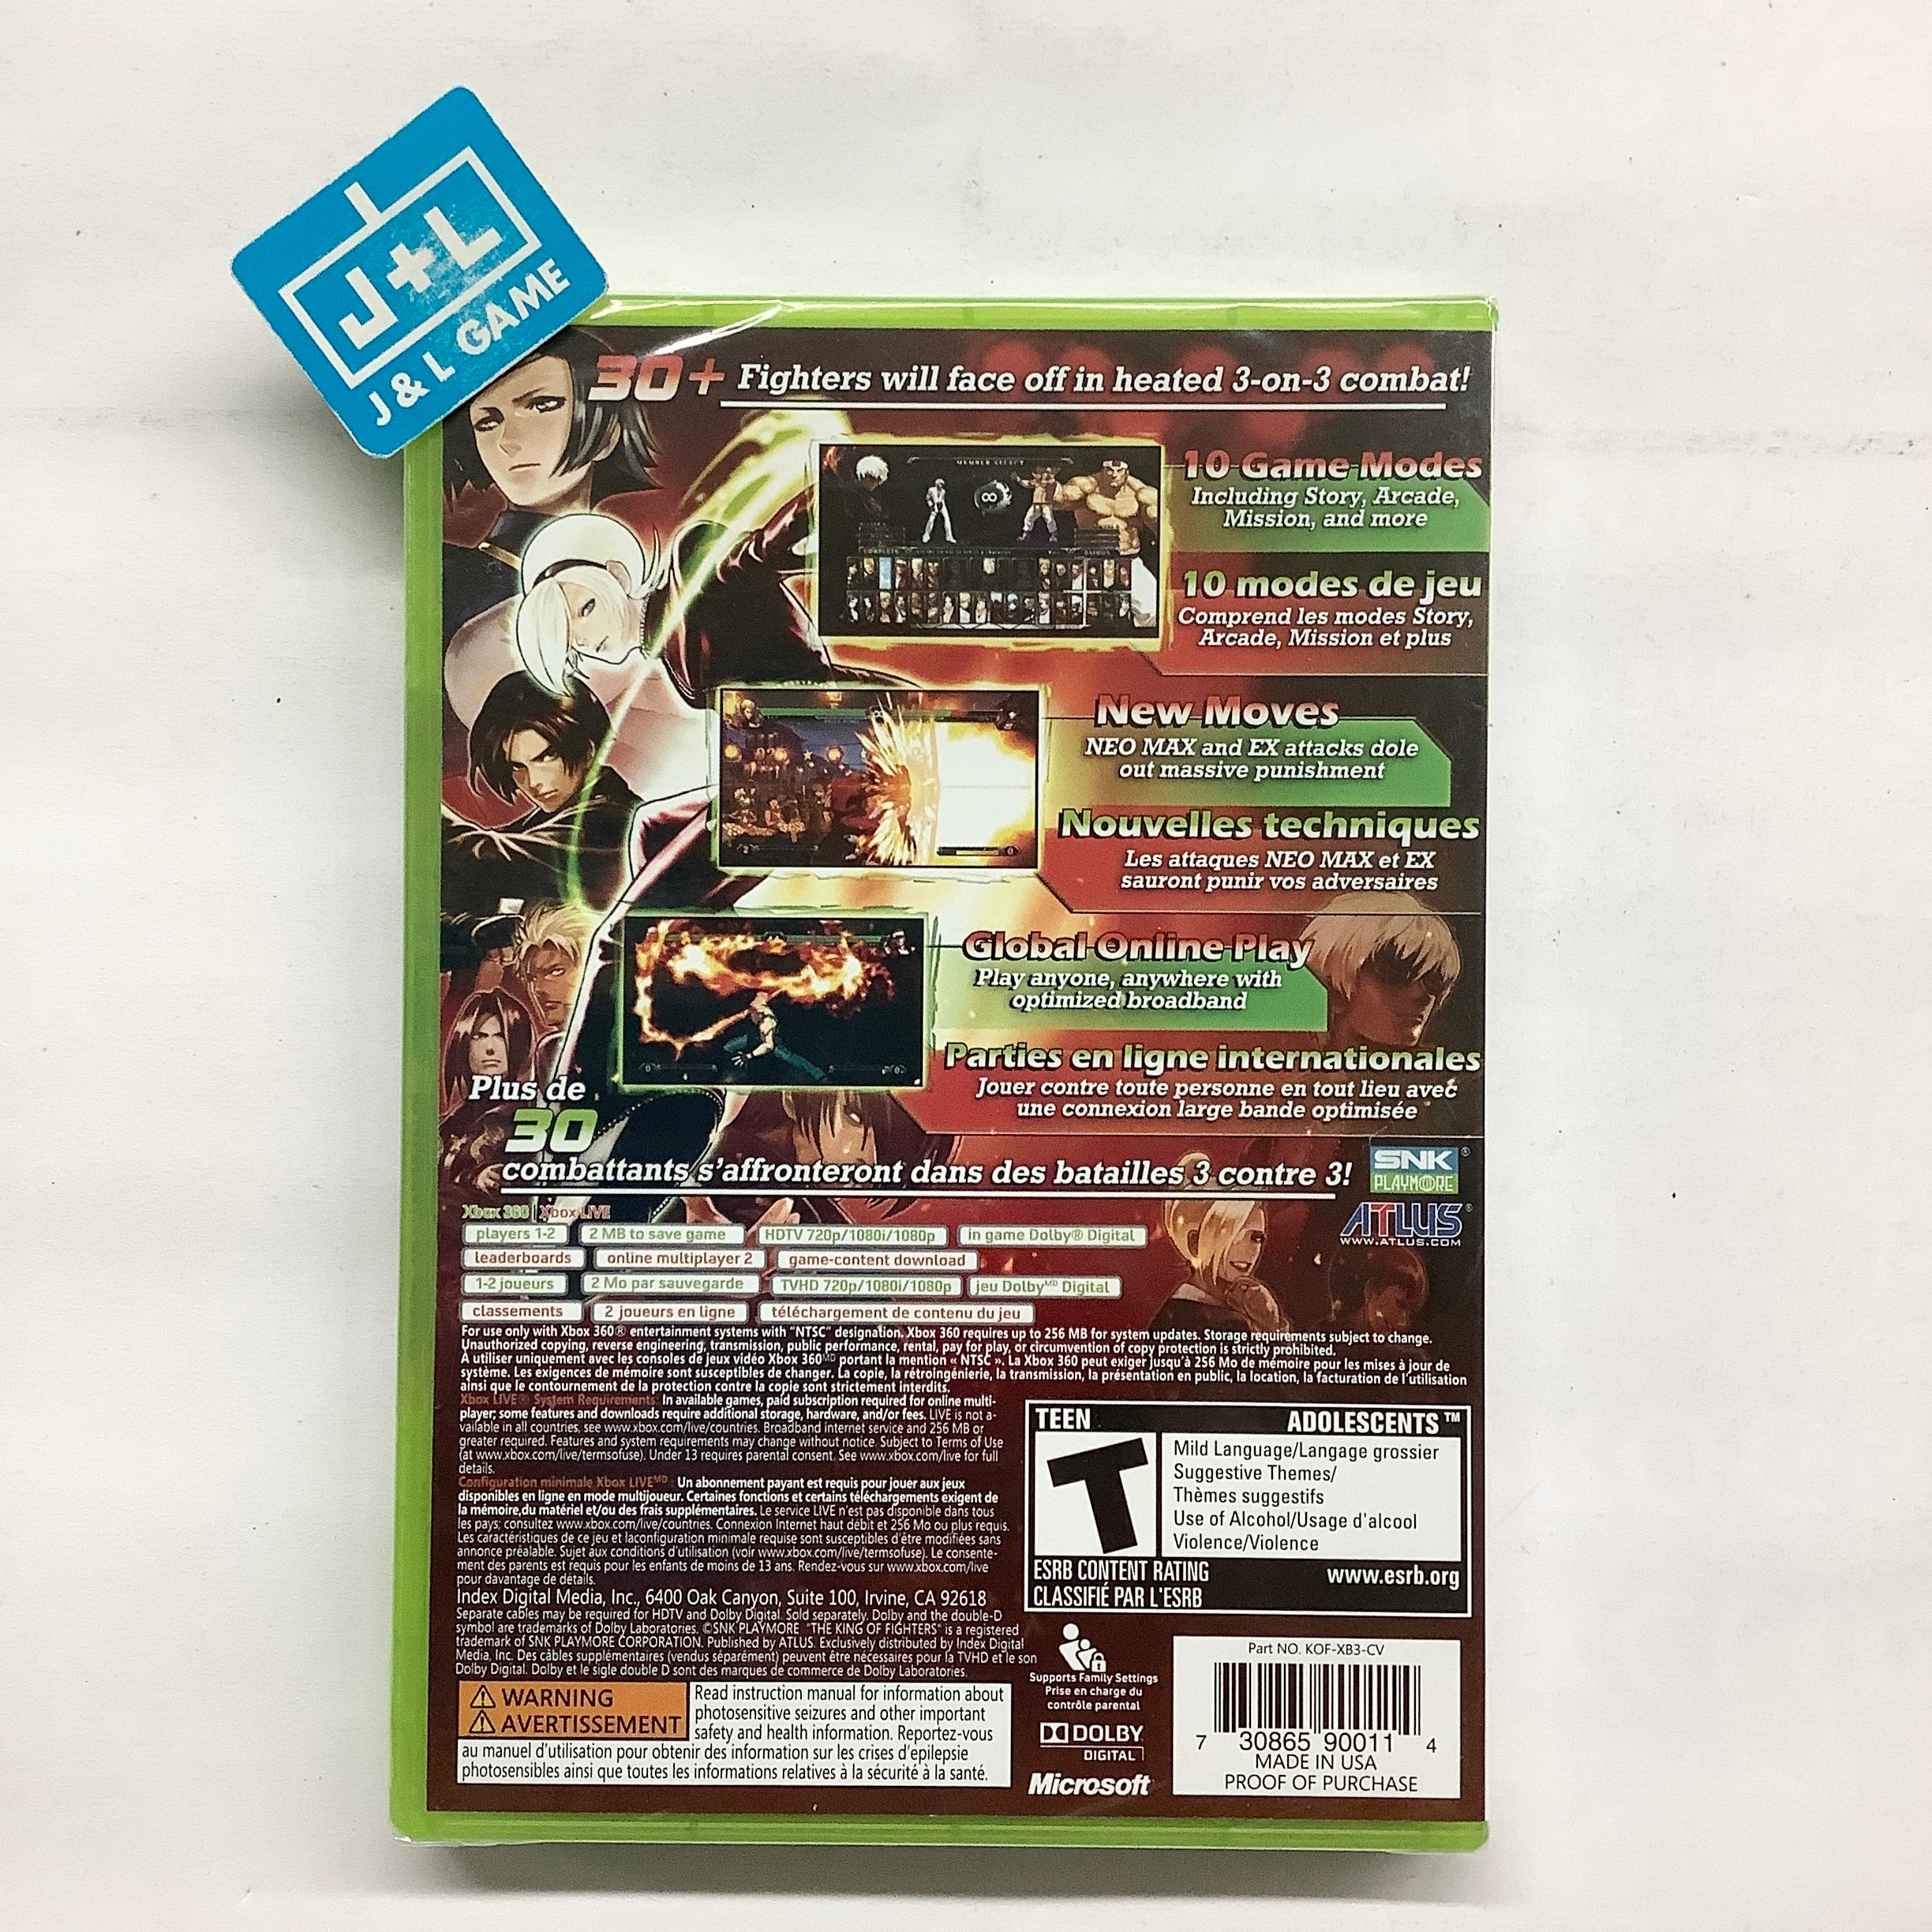 The King of Fighters XIII - Xbox 360 Video Games Atlus   